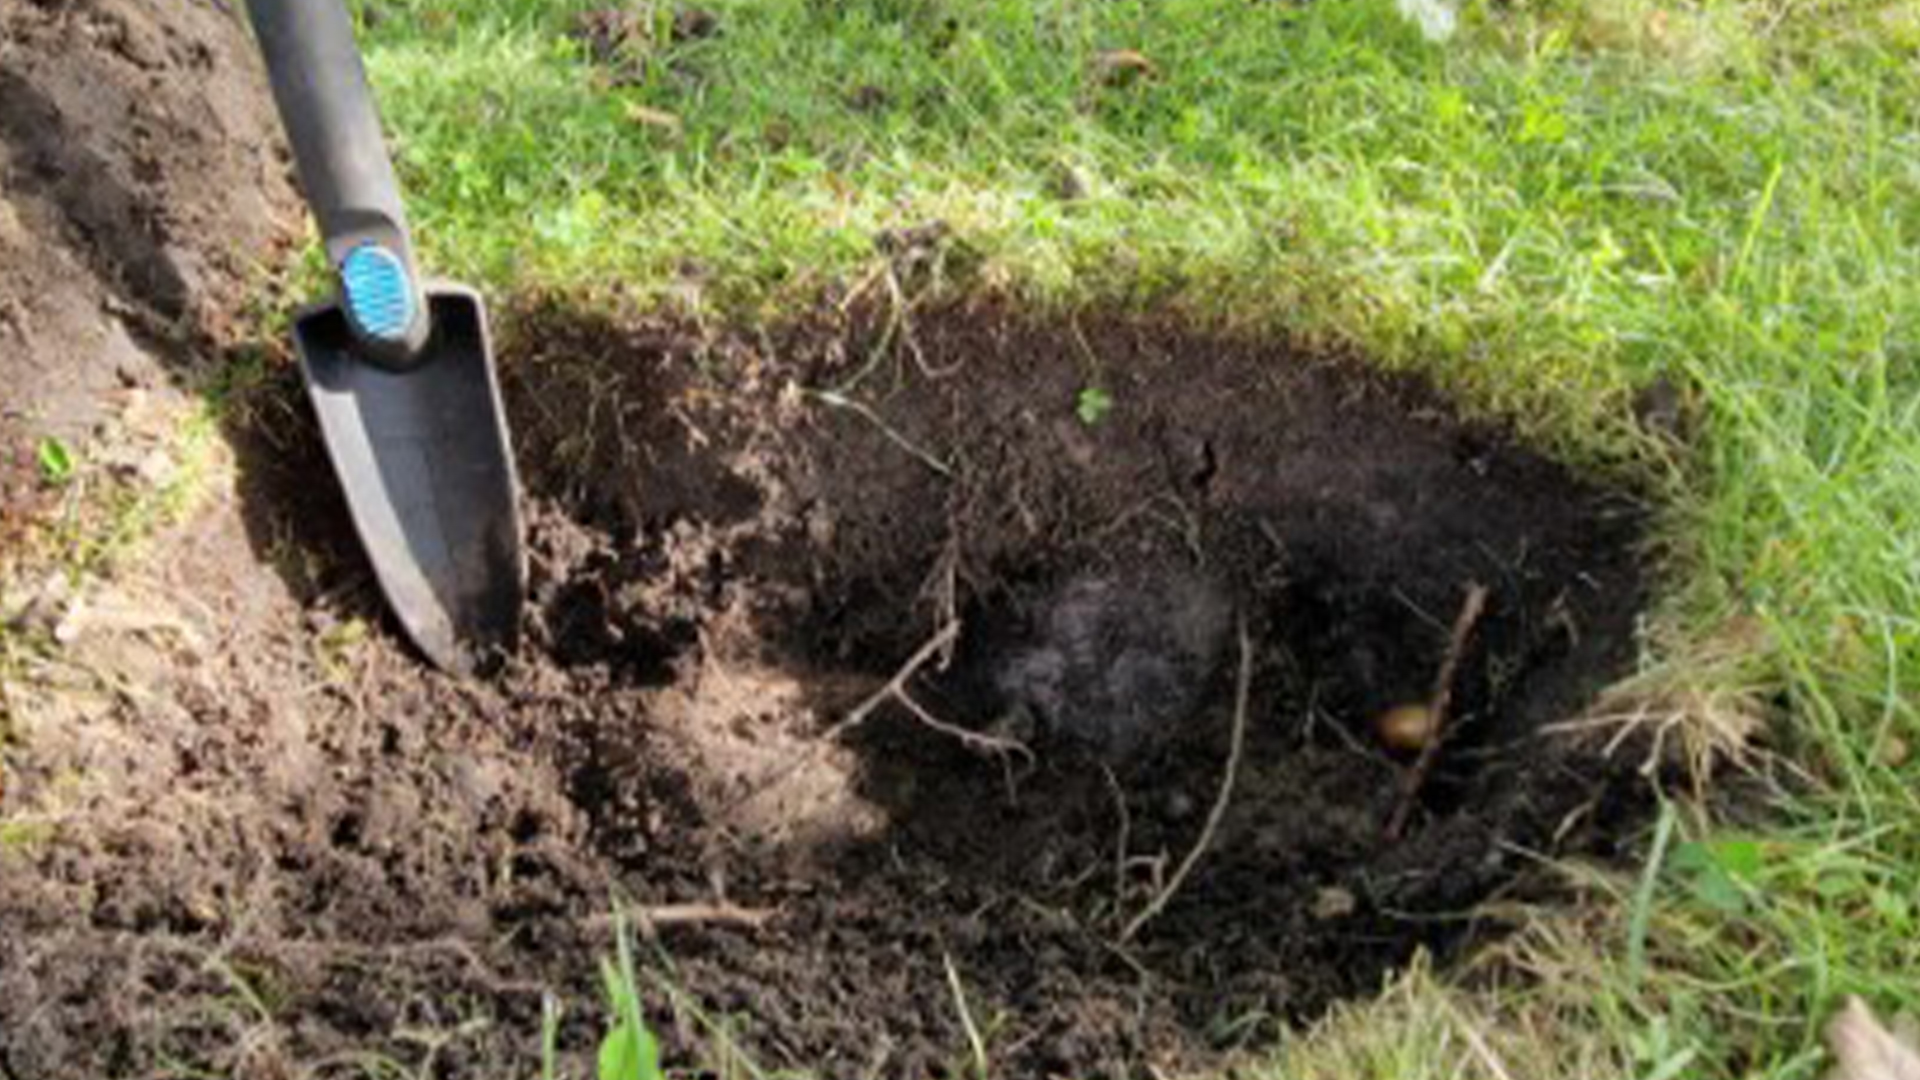 A hand trowel rest next to a dirt hole made in fresh, green grass.